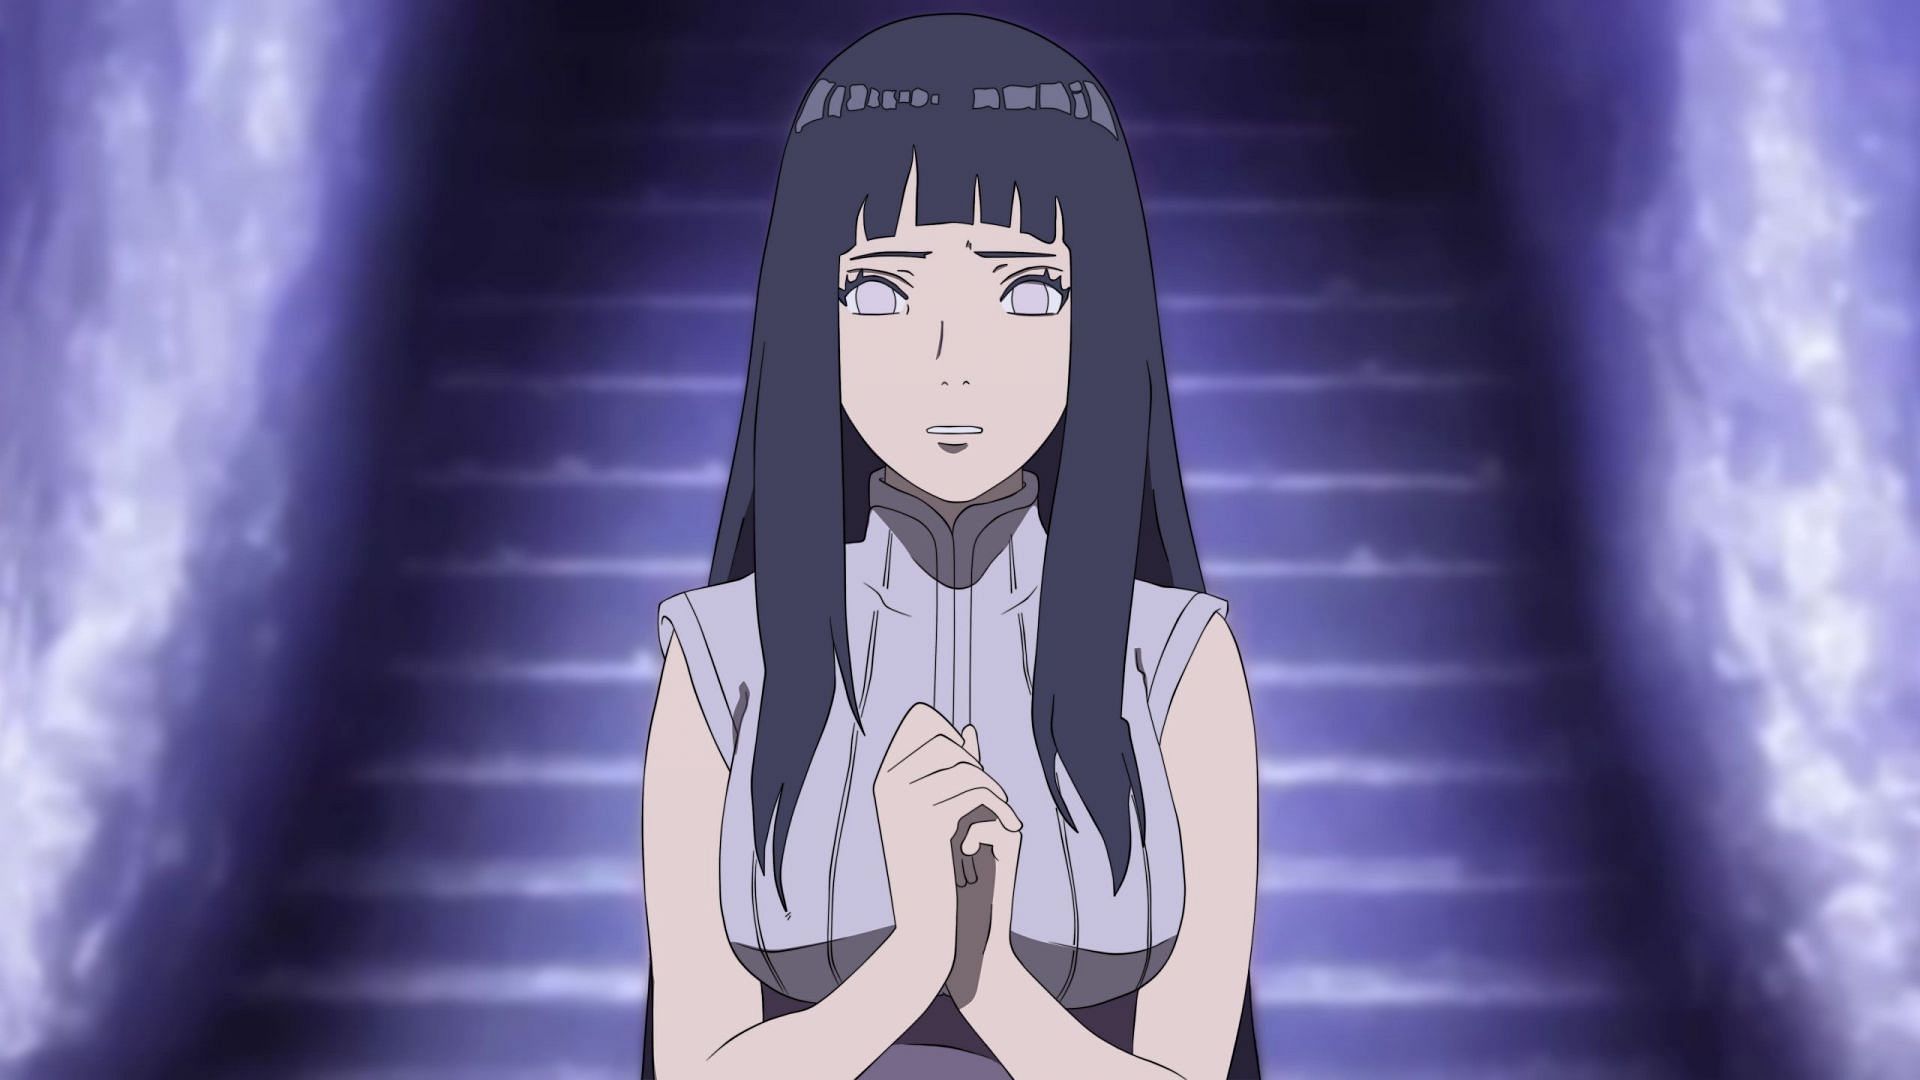 9 anime characters named Hinata, ranked from least to most popular